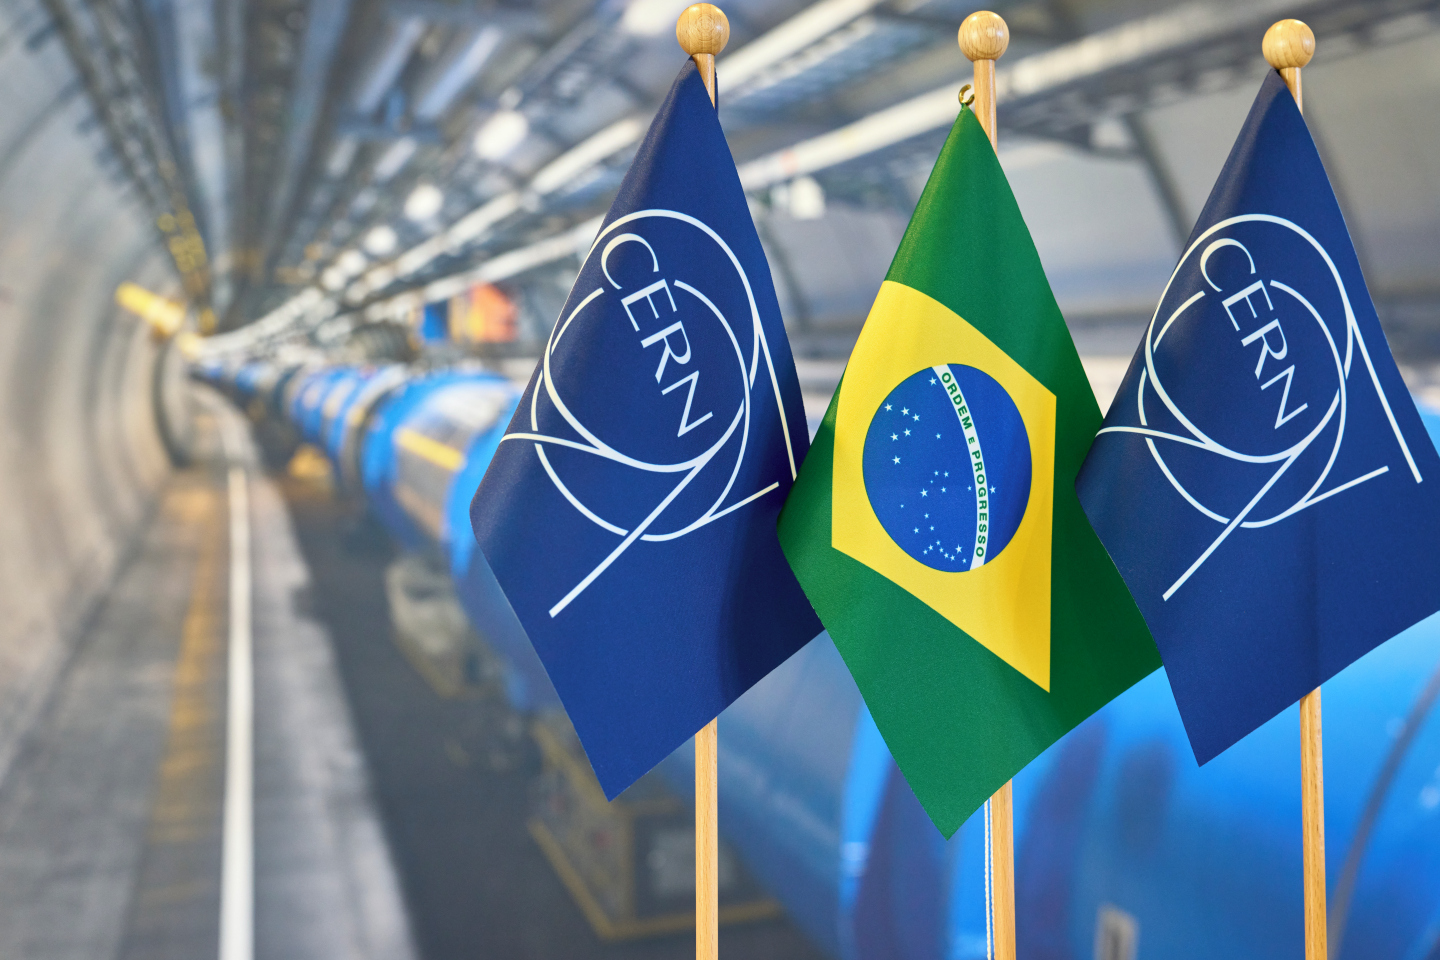 As Brazil becomes Associate Member State of CERN, the Brazilian flag is photographed along with the CERN flag. In the back, we can see the Large Hadron Collider, CERN's flagship accelerator.